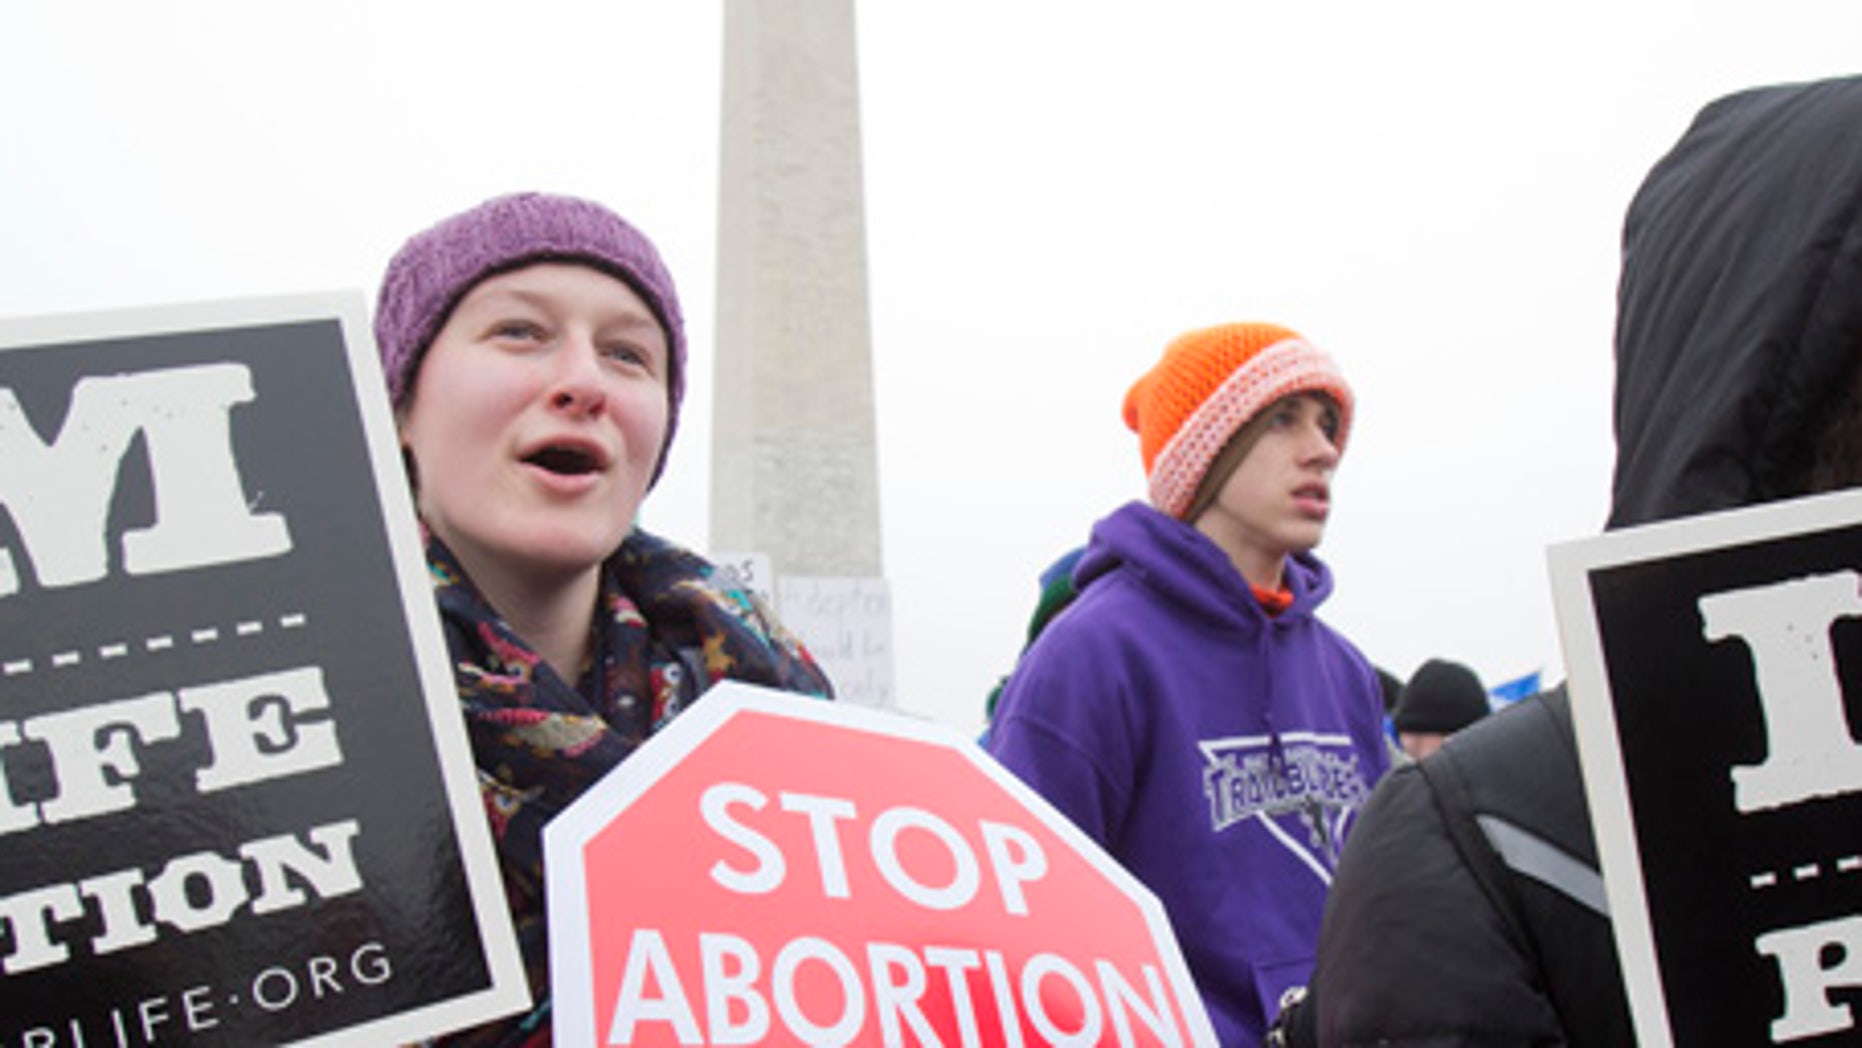 Three-fourths back restricting abortion to first three months of pregnancy at most, poll finds